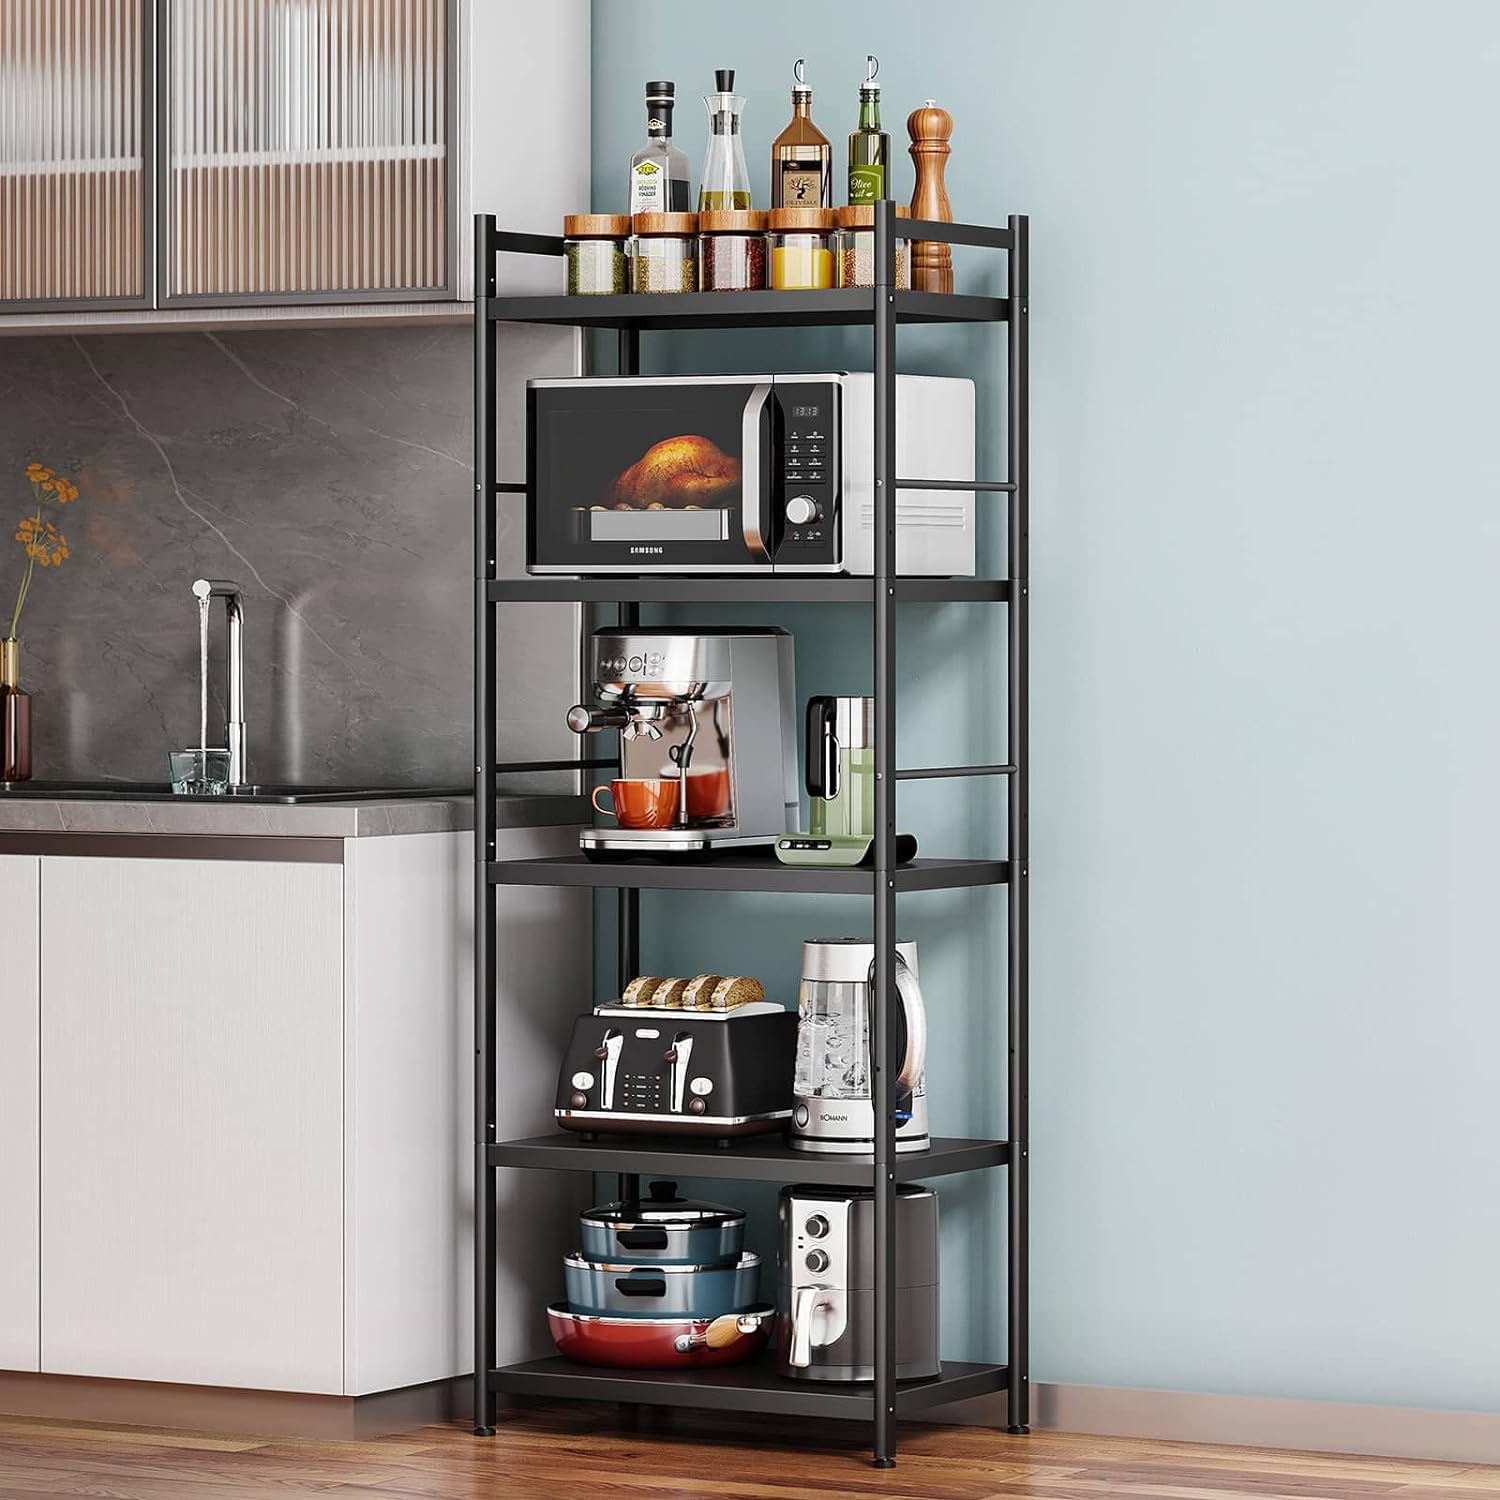 Denkee 5-Tier Bakers Rack for Kitchen (23.23 L x 15.16 W x 60.91 H) - $50